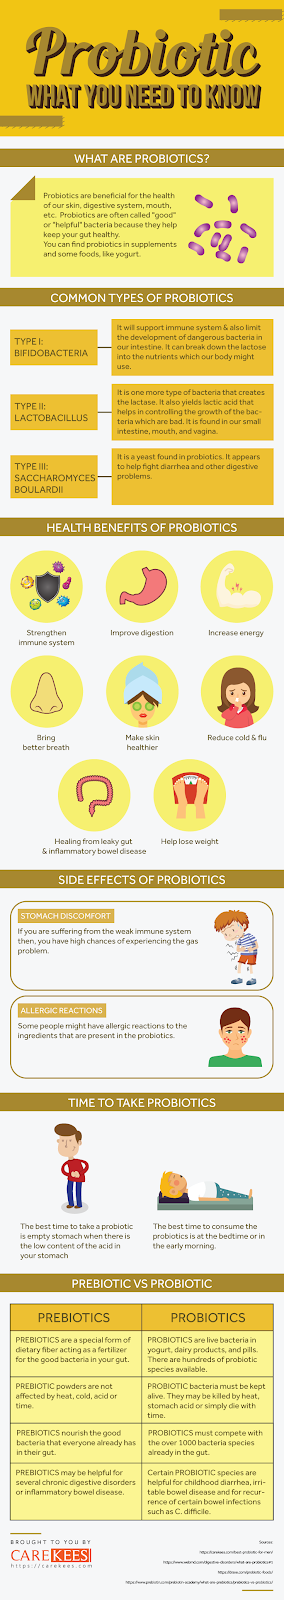 Probiotic | What you need to know